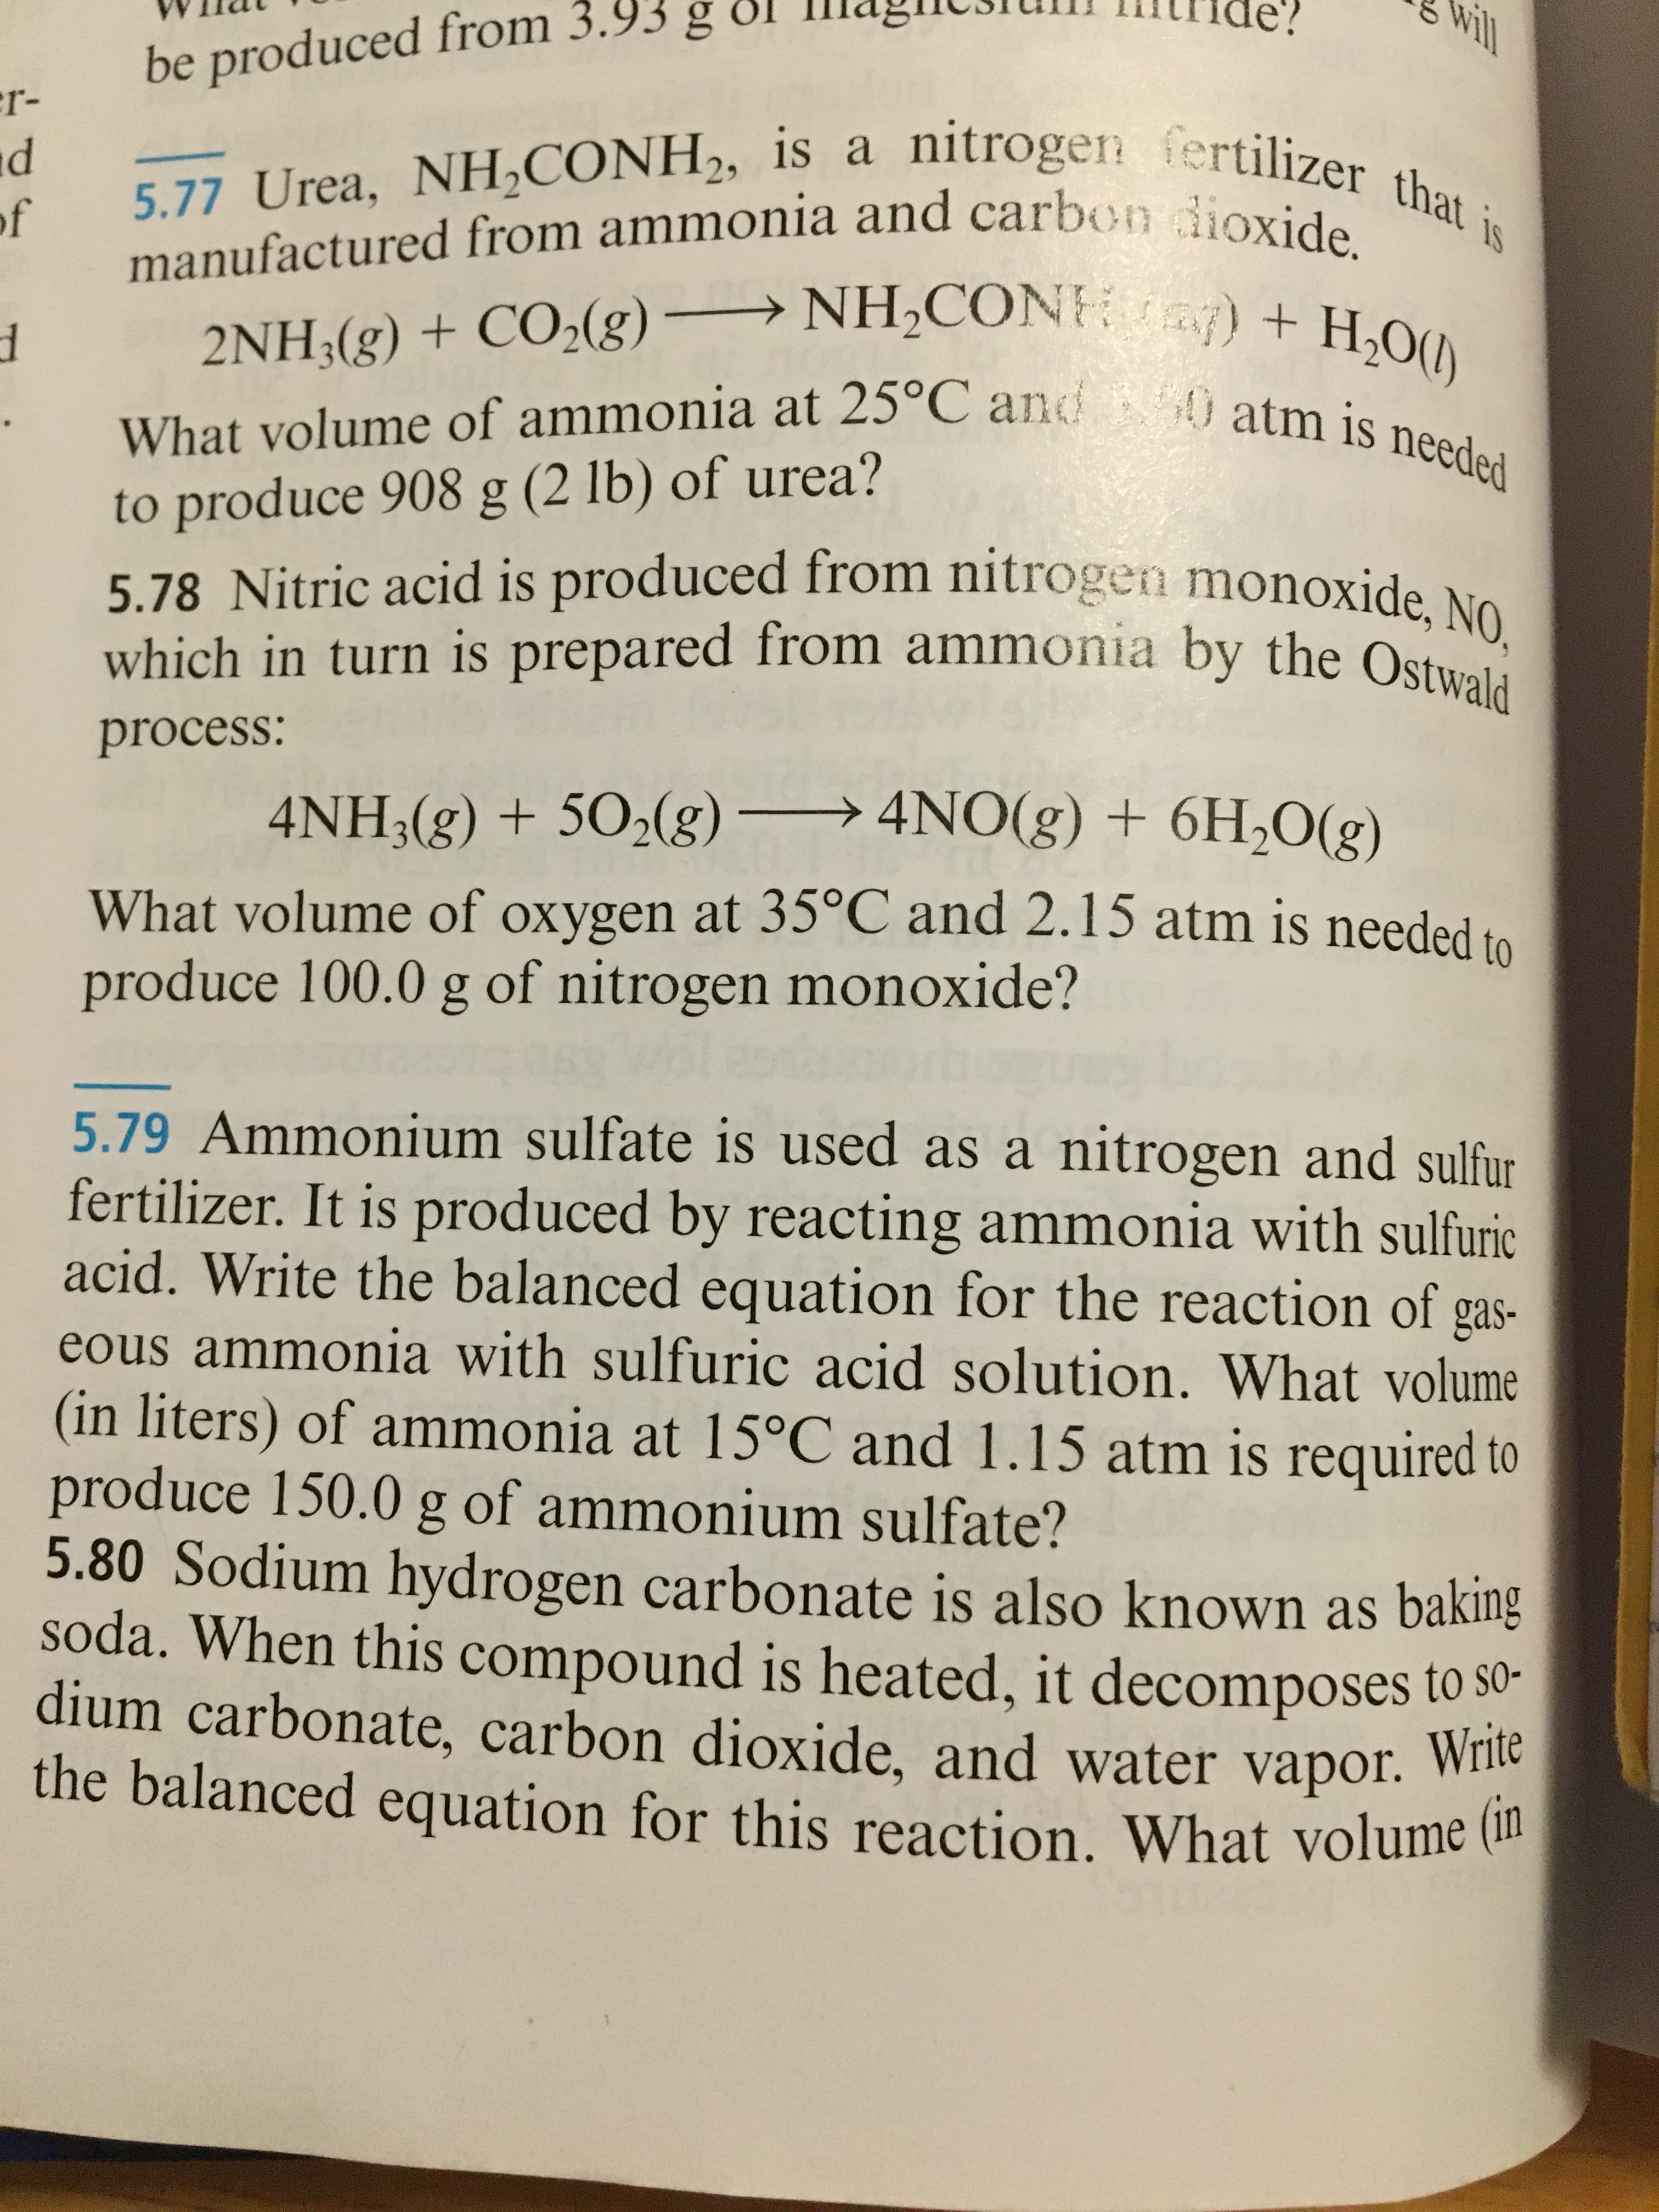 5.78 Nitric acid is produced from nitrogen monoxide No
which in turn is prepared from ammonia by the Ostwald
process:
4NH3(g) + 502(g) → 4NO(g) + 6H,0(g)
What volume of oxygen at 35°C and 2.15 atm is needed to
produce 100.0 g of nitrogen monoxide?
